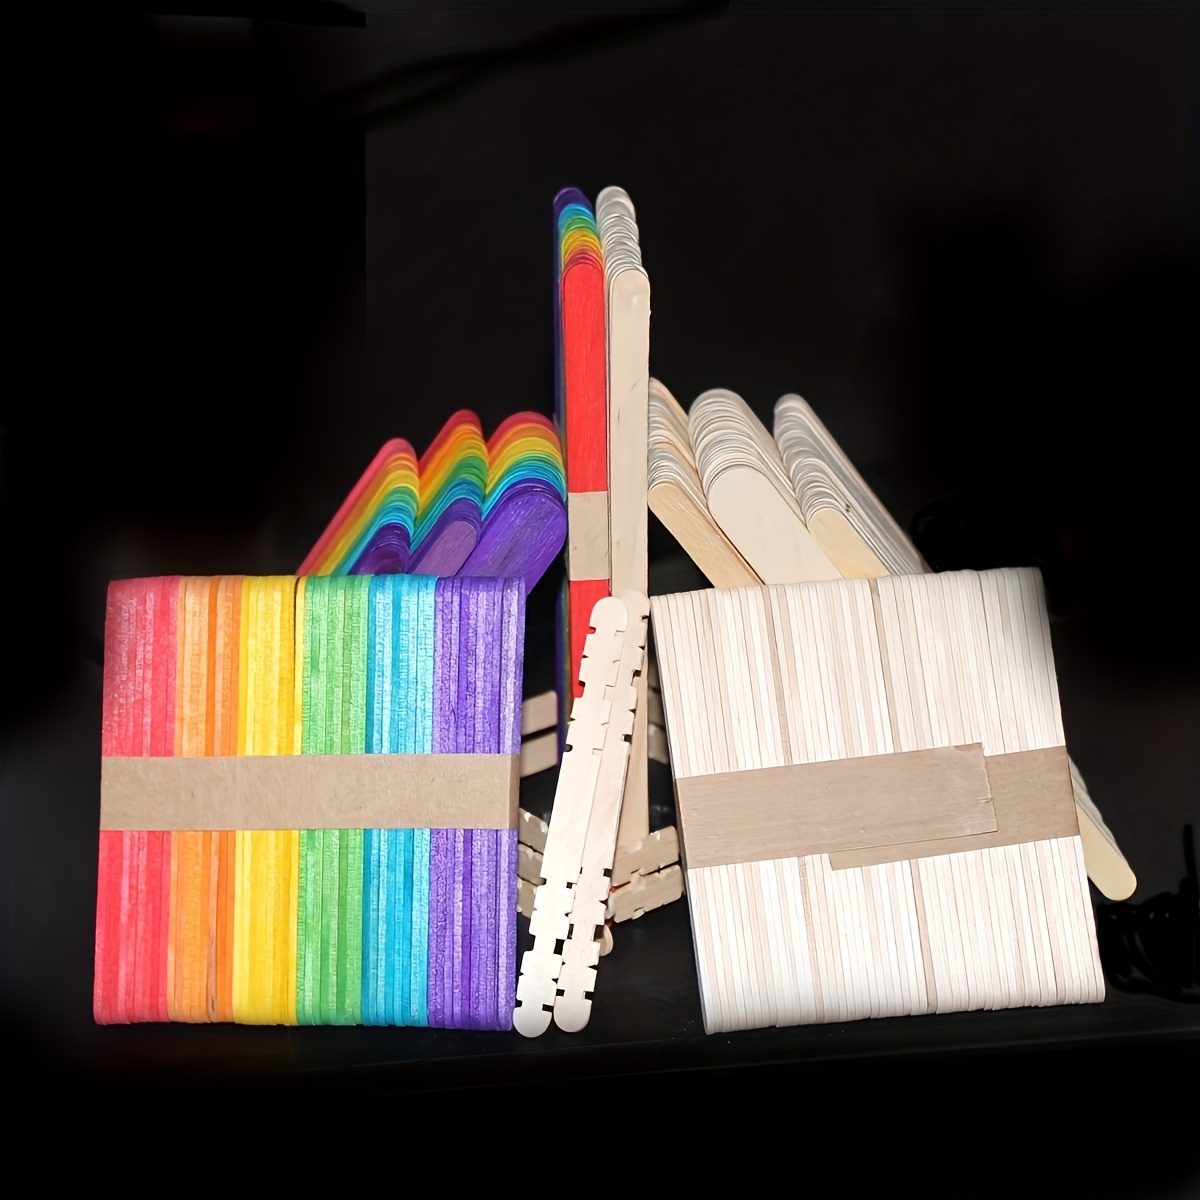  Wooden Colorful Jumbo Popsicle Sticks - 6 100 Pcs Craft Sticks  for Home Art Supplies and Classroom : Arts, Crafts & Sewing